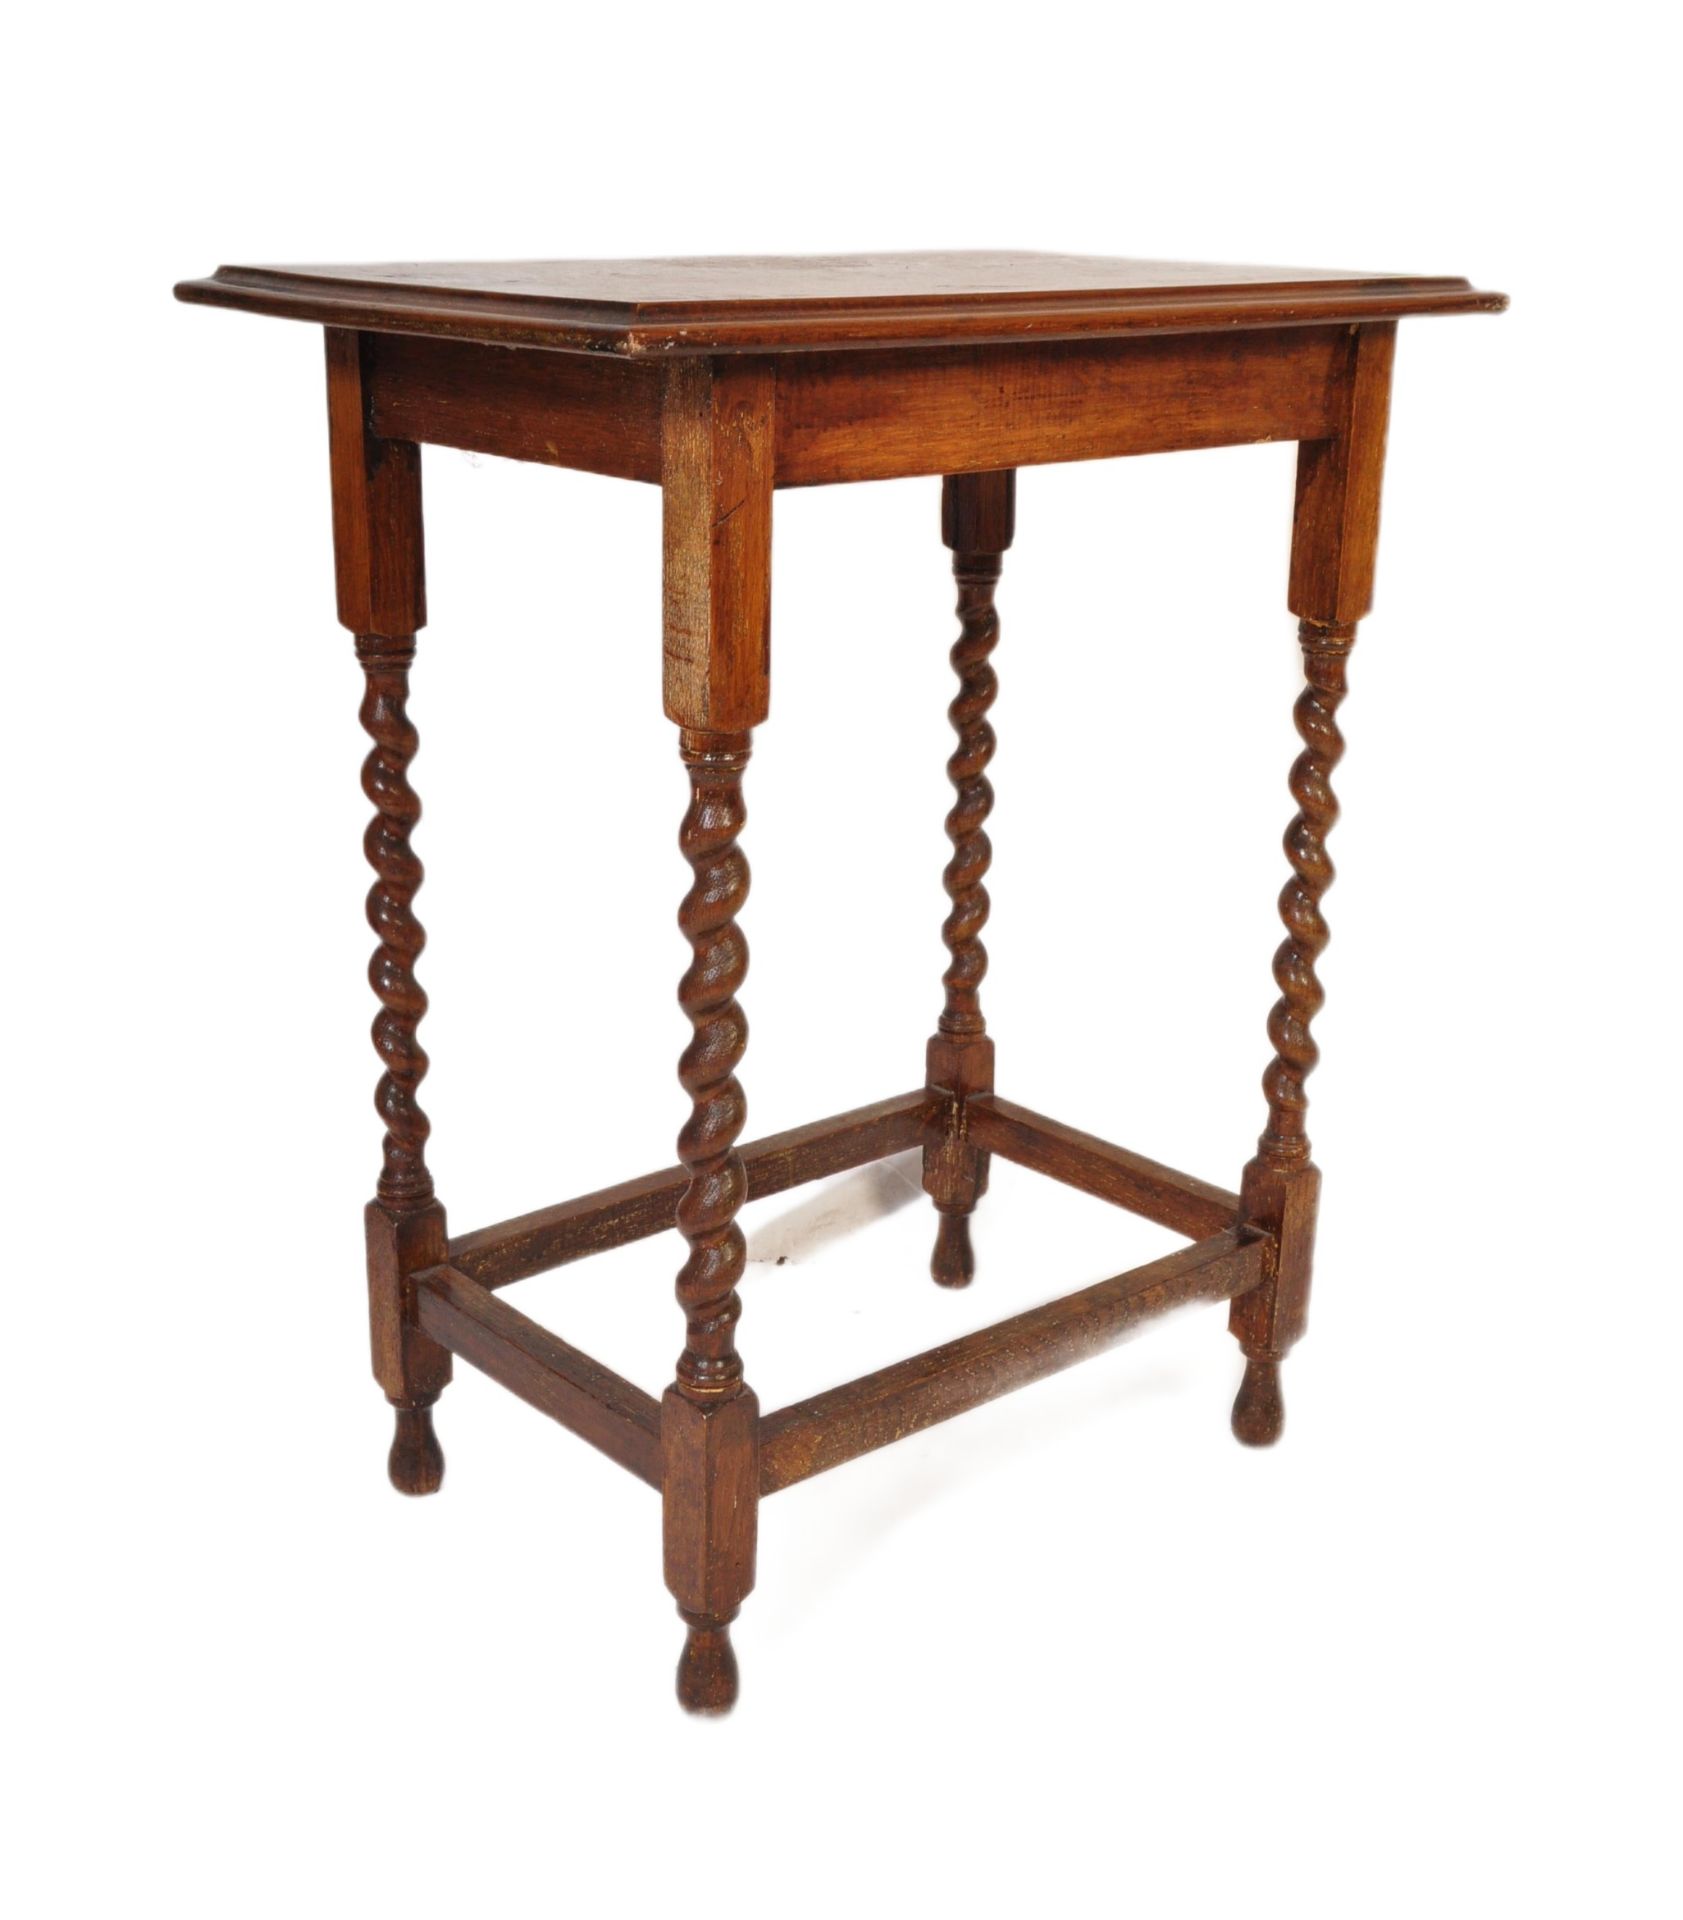 EARLY 20TH CENTURY BARELY TWIST OAK OCCASIONAL SIDE HALL TABLE